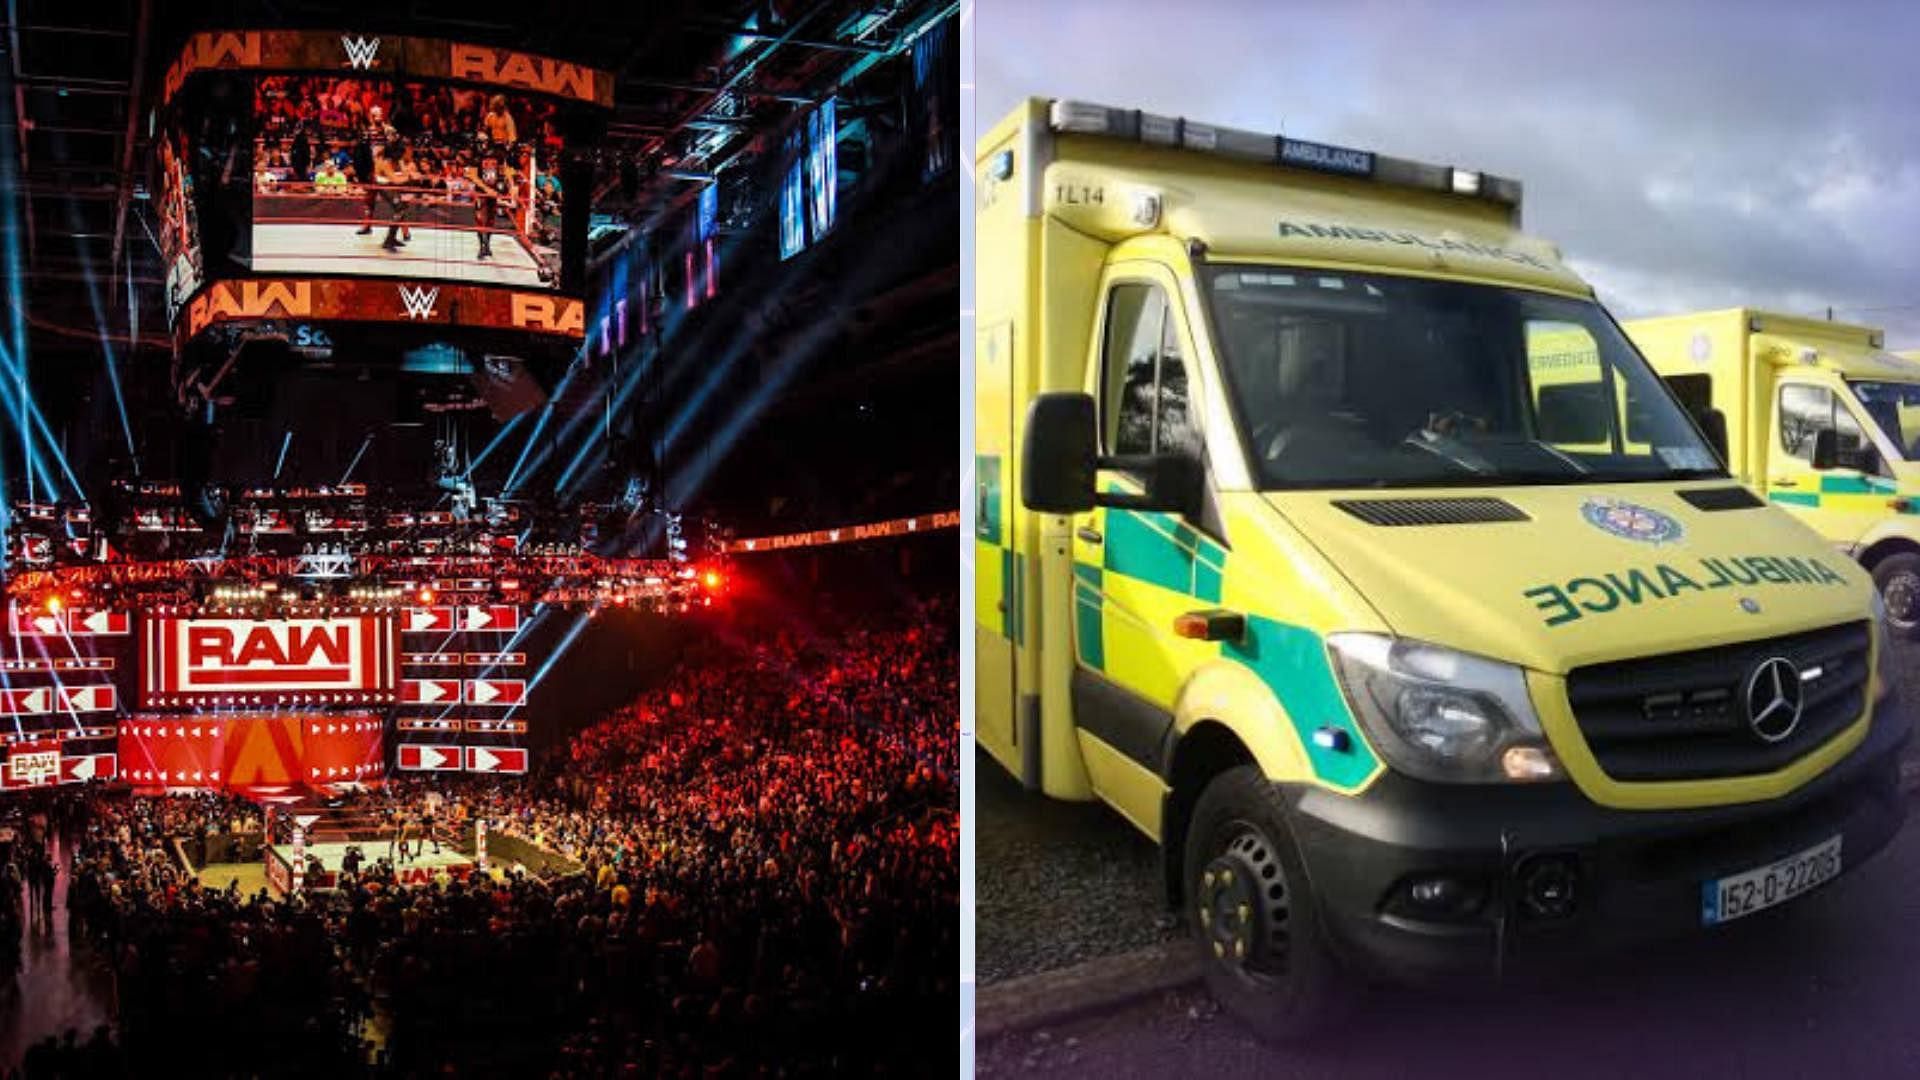 WWE RAW saw a superstar wrestling in spite of a serious injury